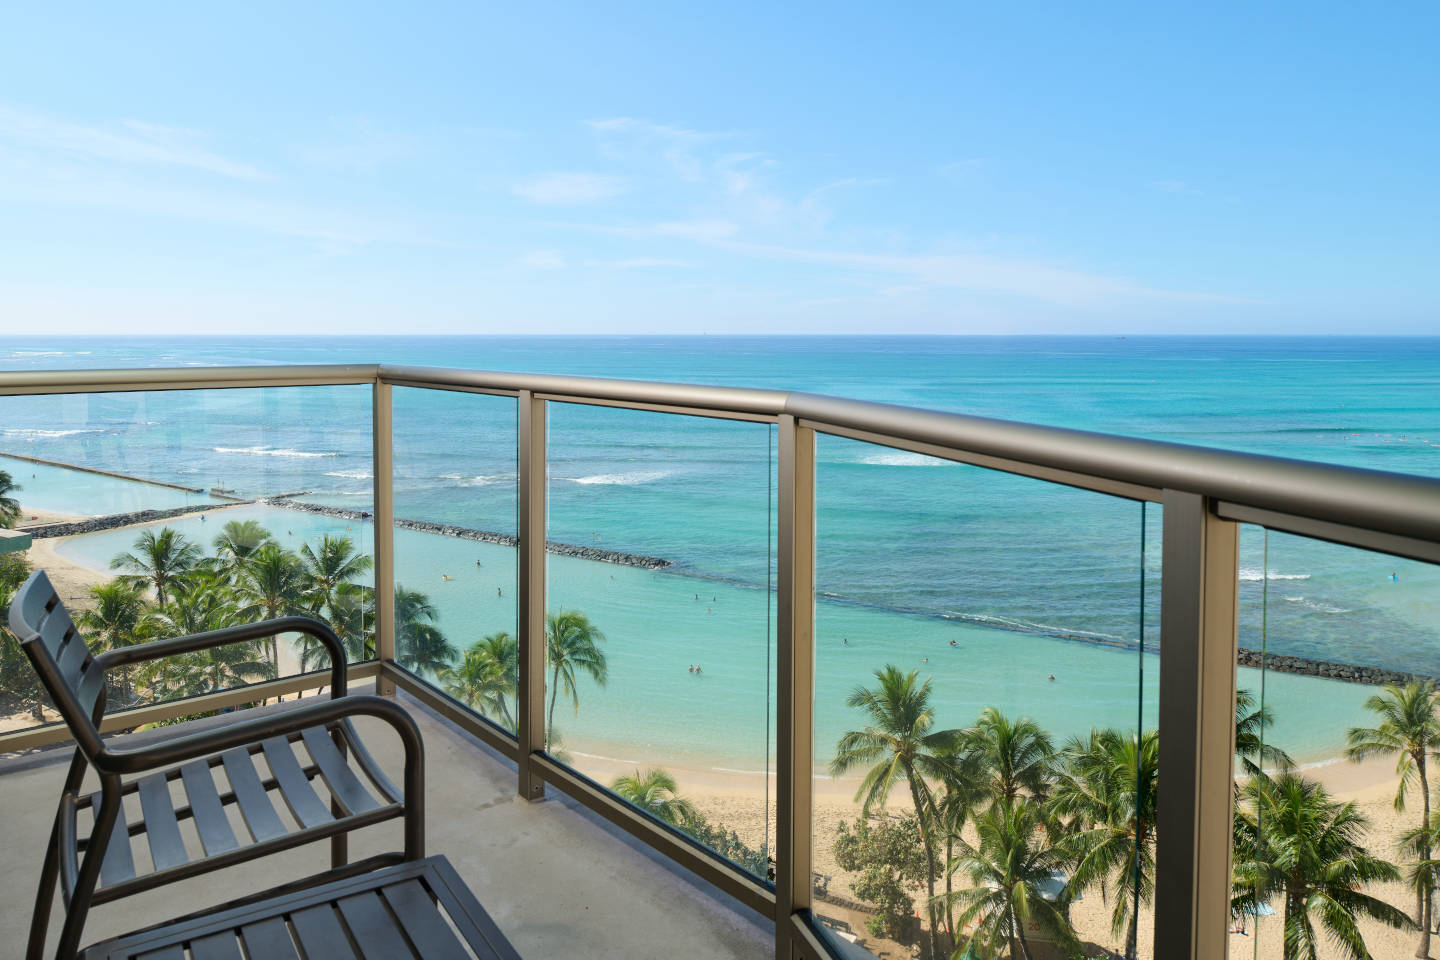 Unobstructed views of Waikiki Beach from the balcony of this Oceanfront Deluxe Accessible room at Aston Waikiki Cicle Hotel